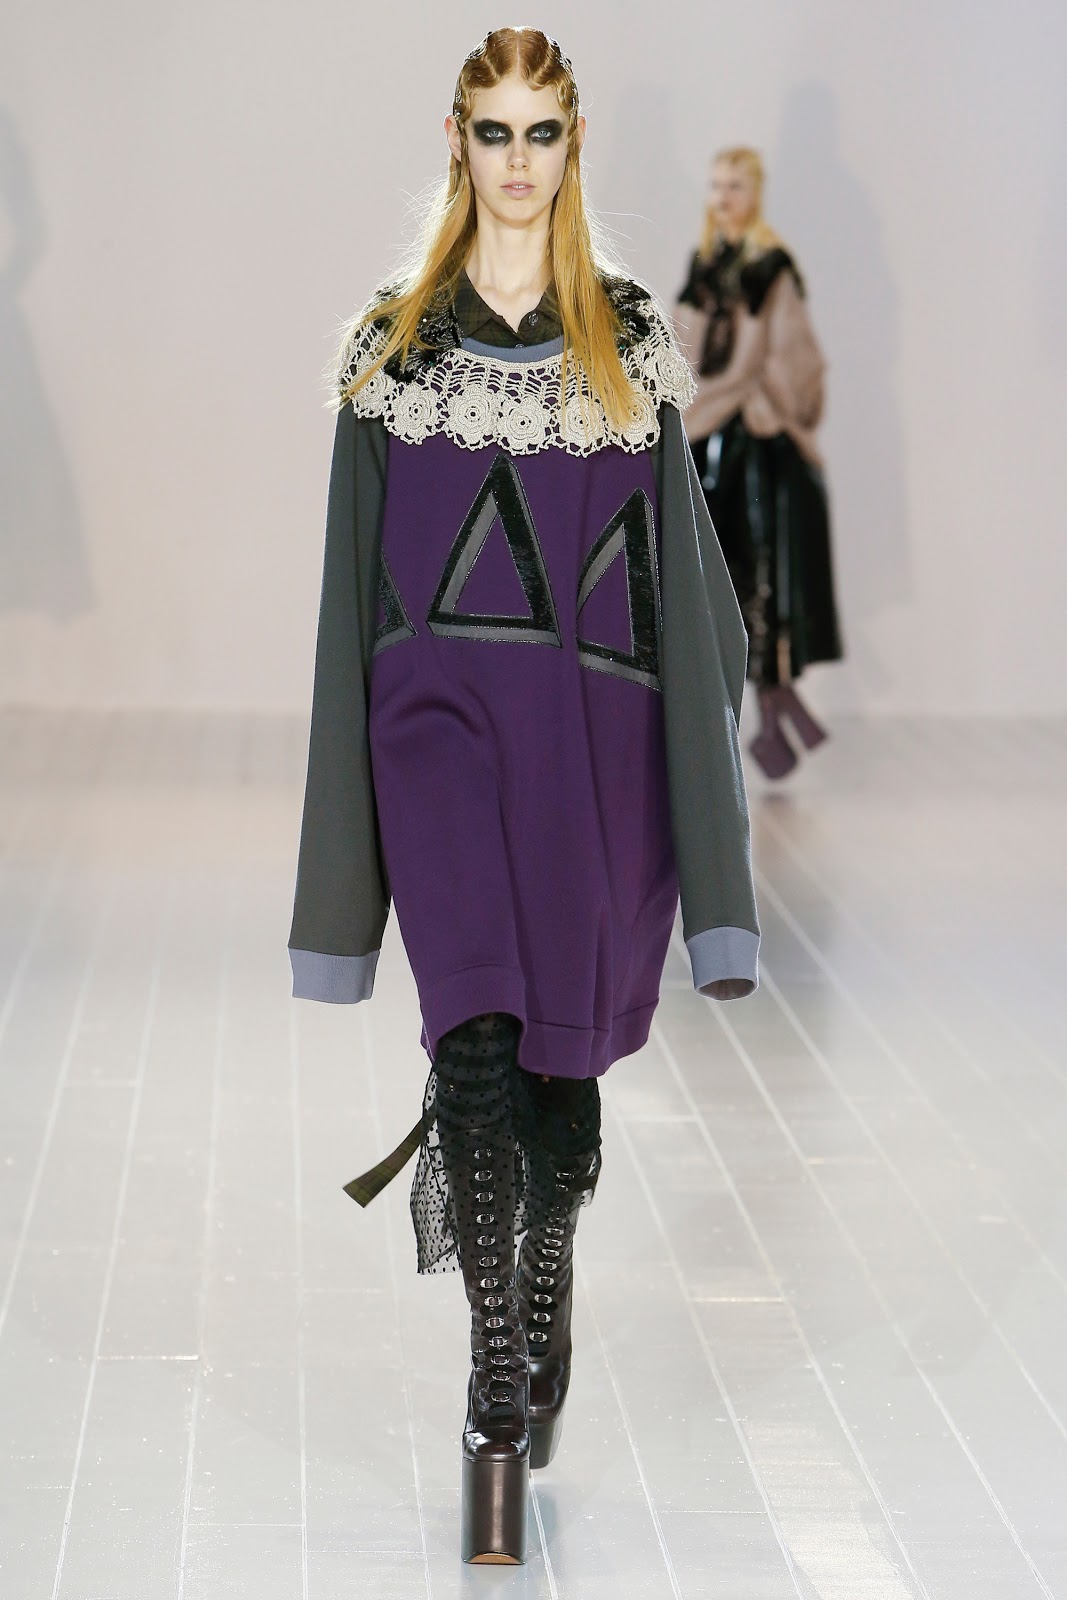 Fashion Runway | Marc Jacobs Fall 2016 : Glamorous and Gothic - New ...